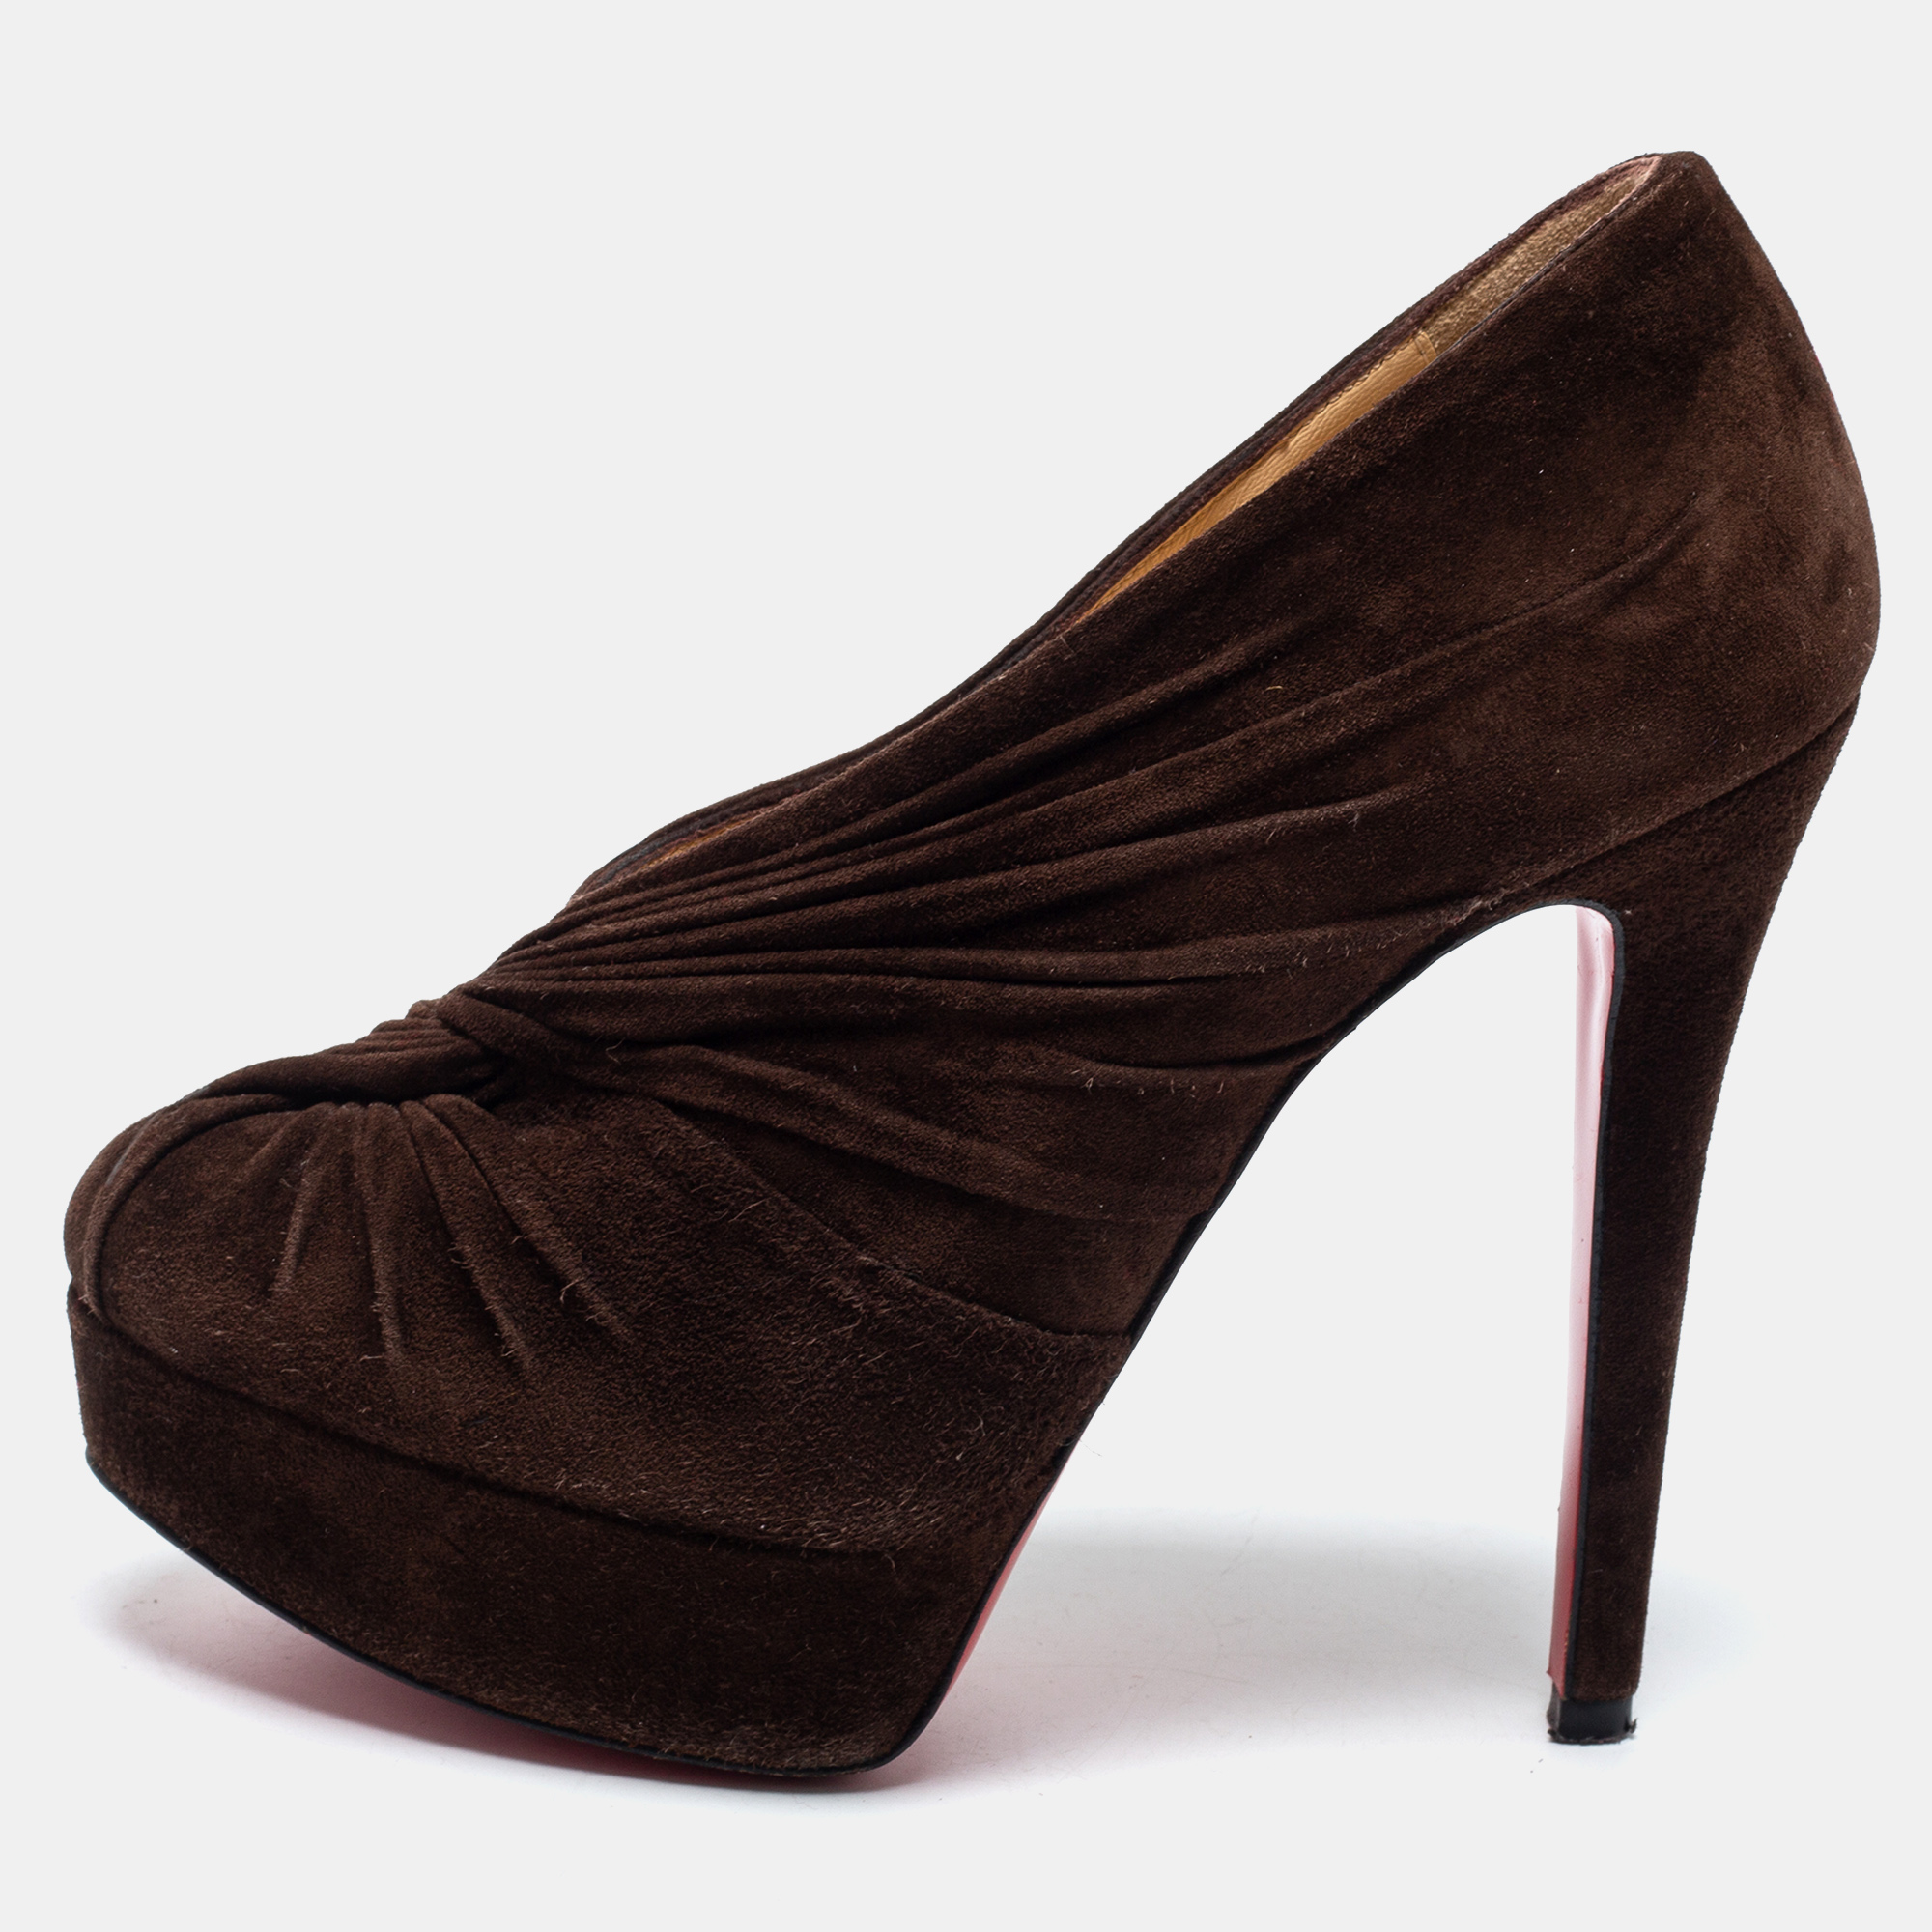 Christian louboutin brown pleated suede platform ankle booties size 35.5